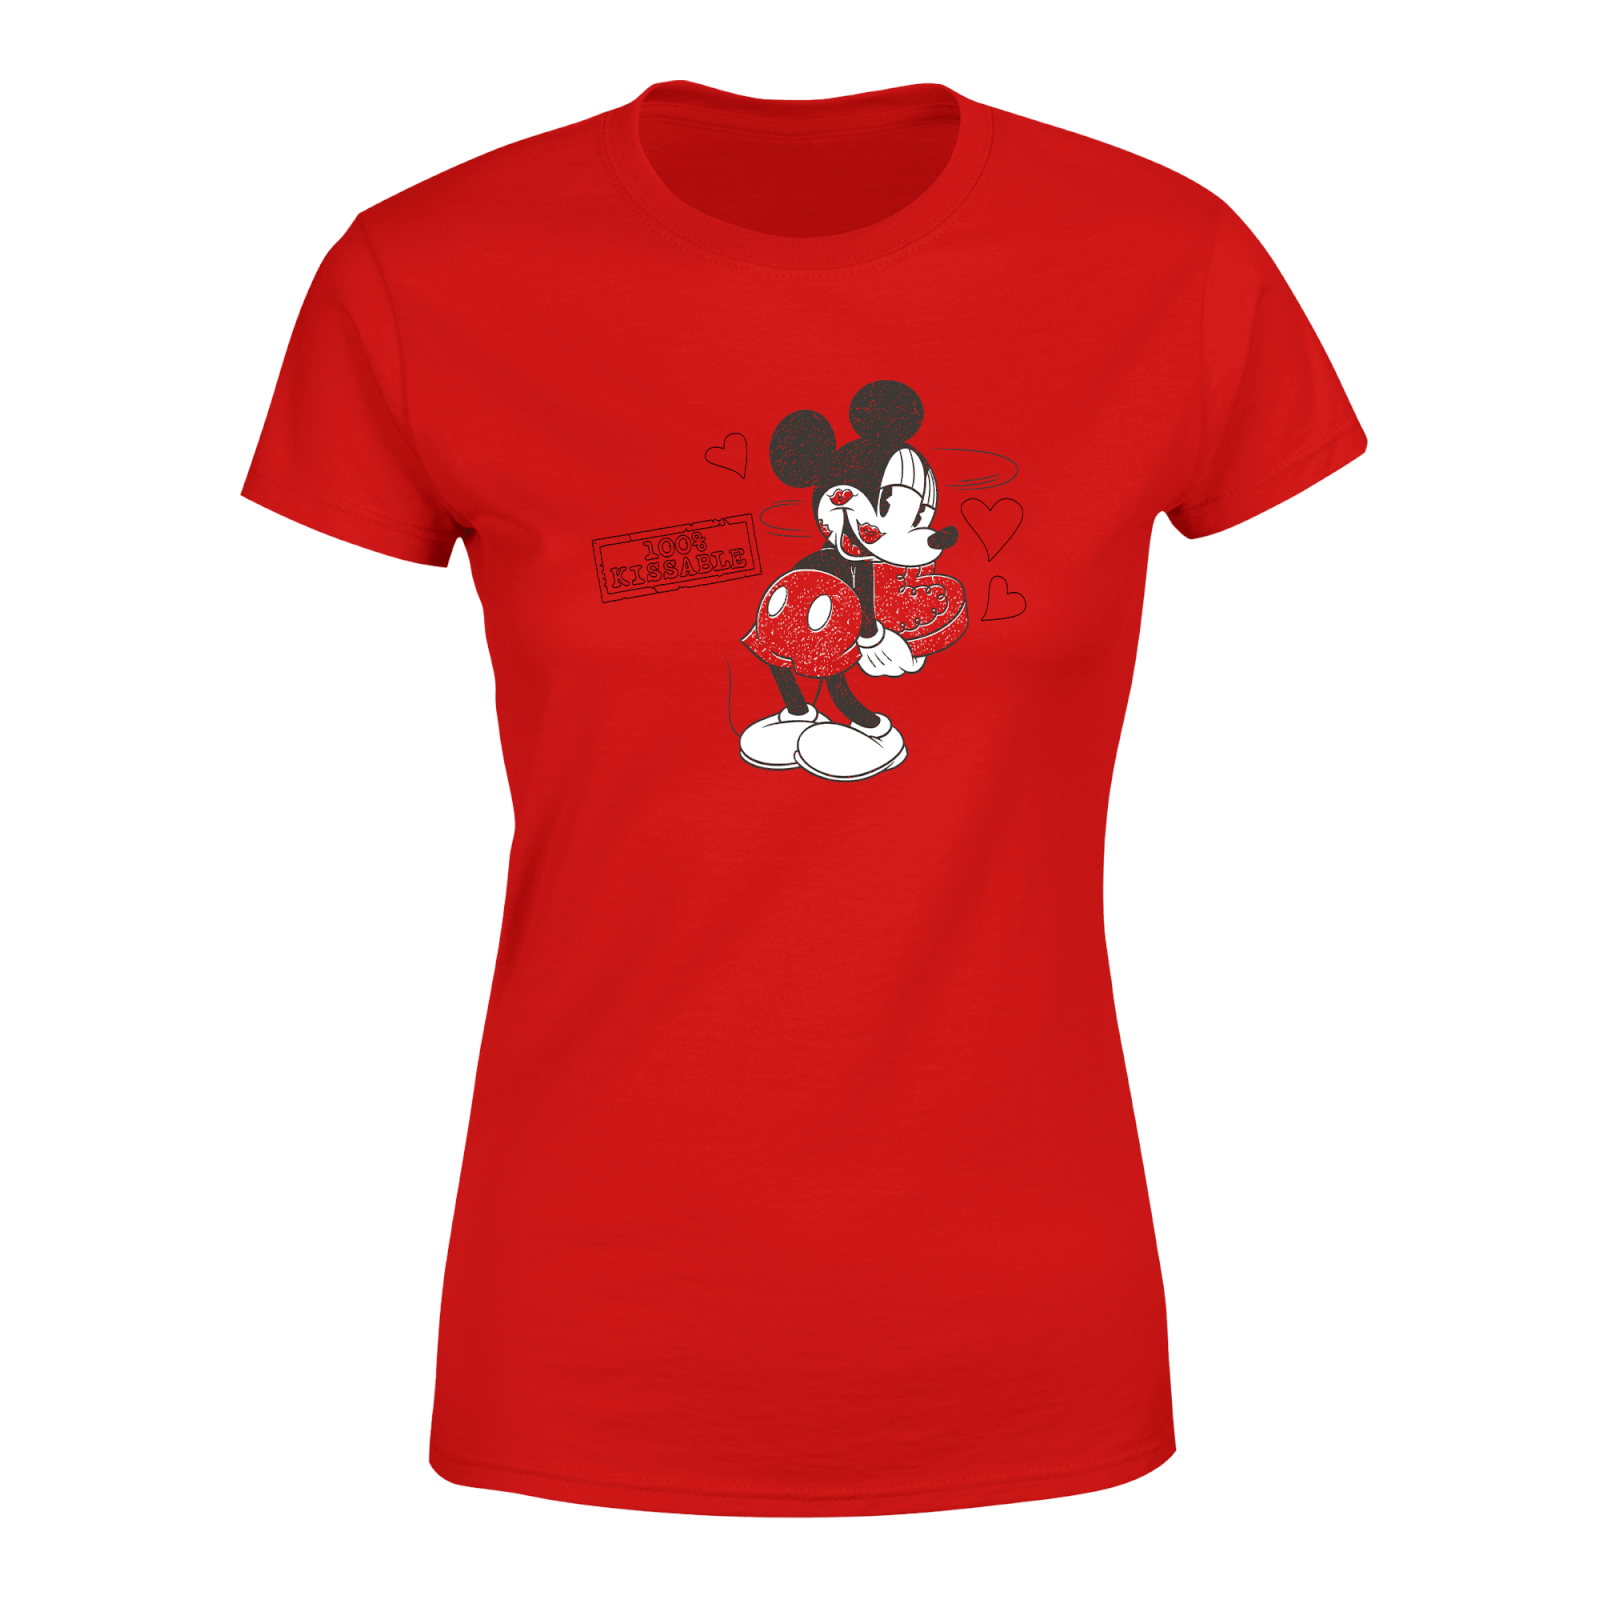 Mickey Mouse 100% Kissable Women's T-Shirt - Red - S - Red